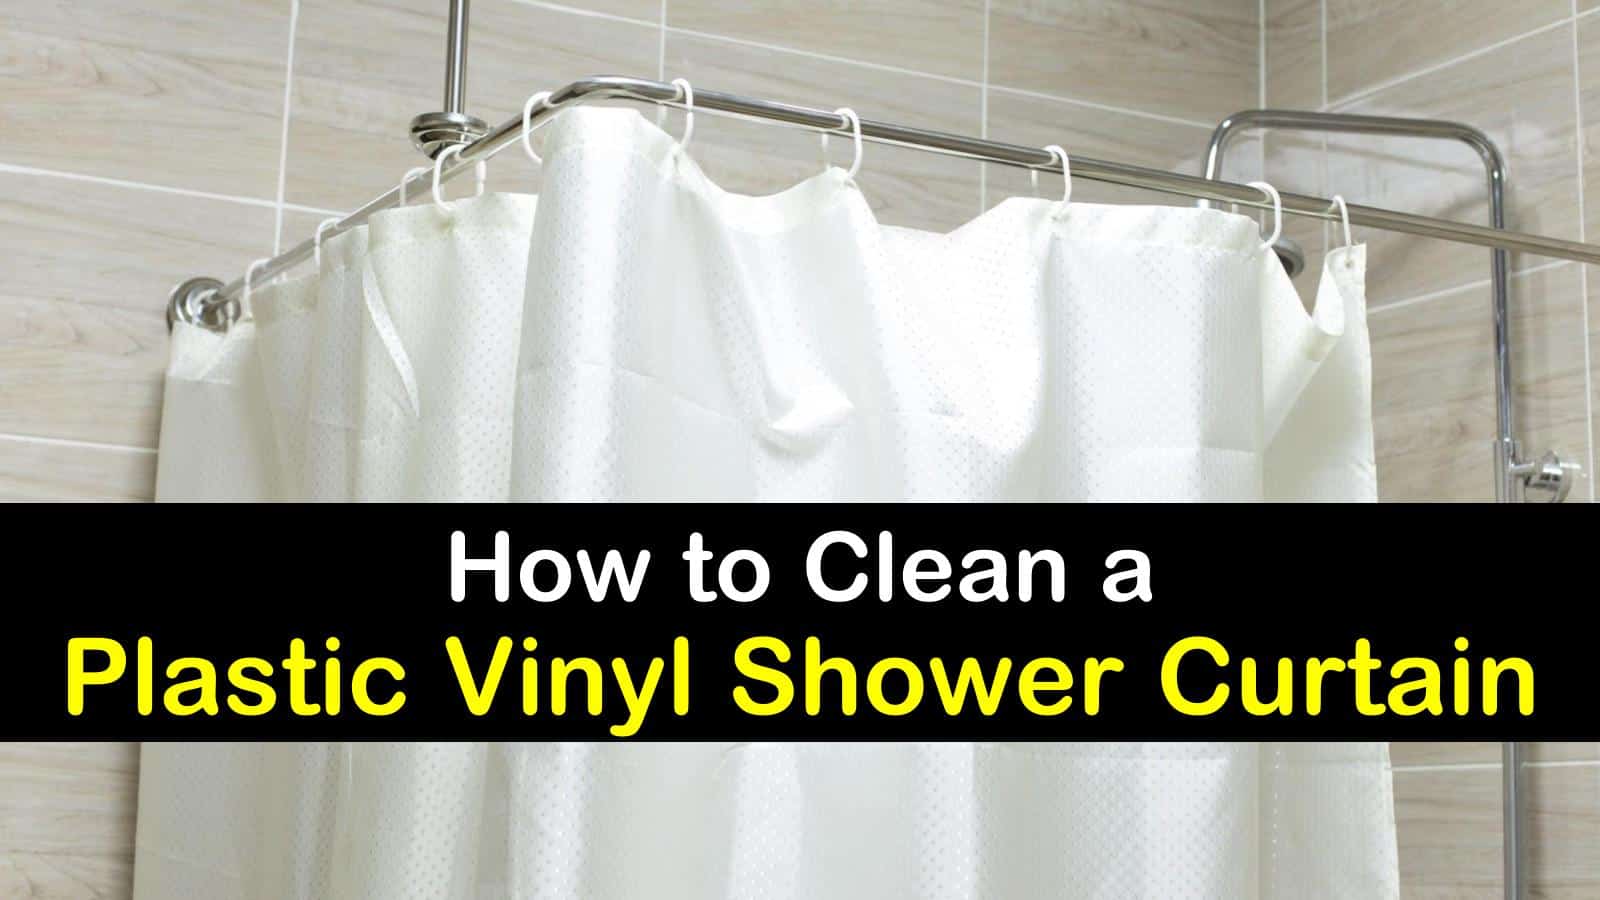 5 Excellent Ways To Clean A Shower Curtain, Does Washing Curtains Remove Mold